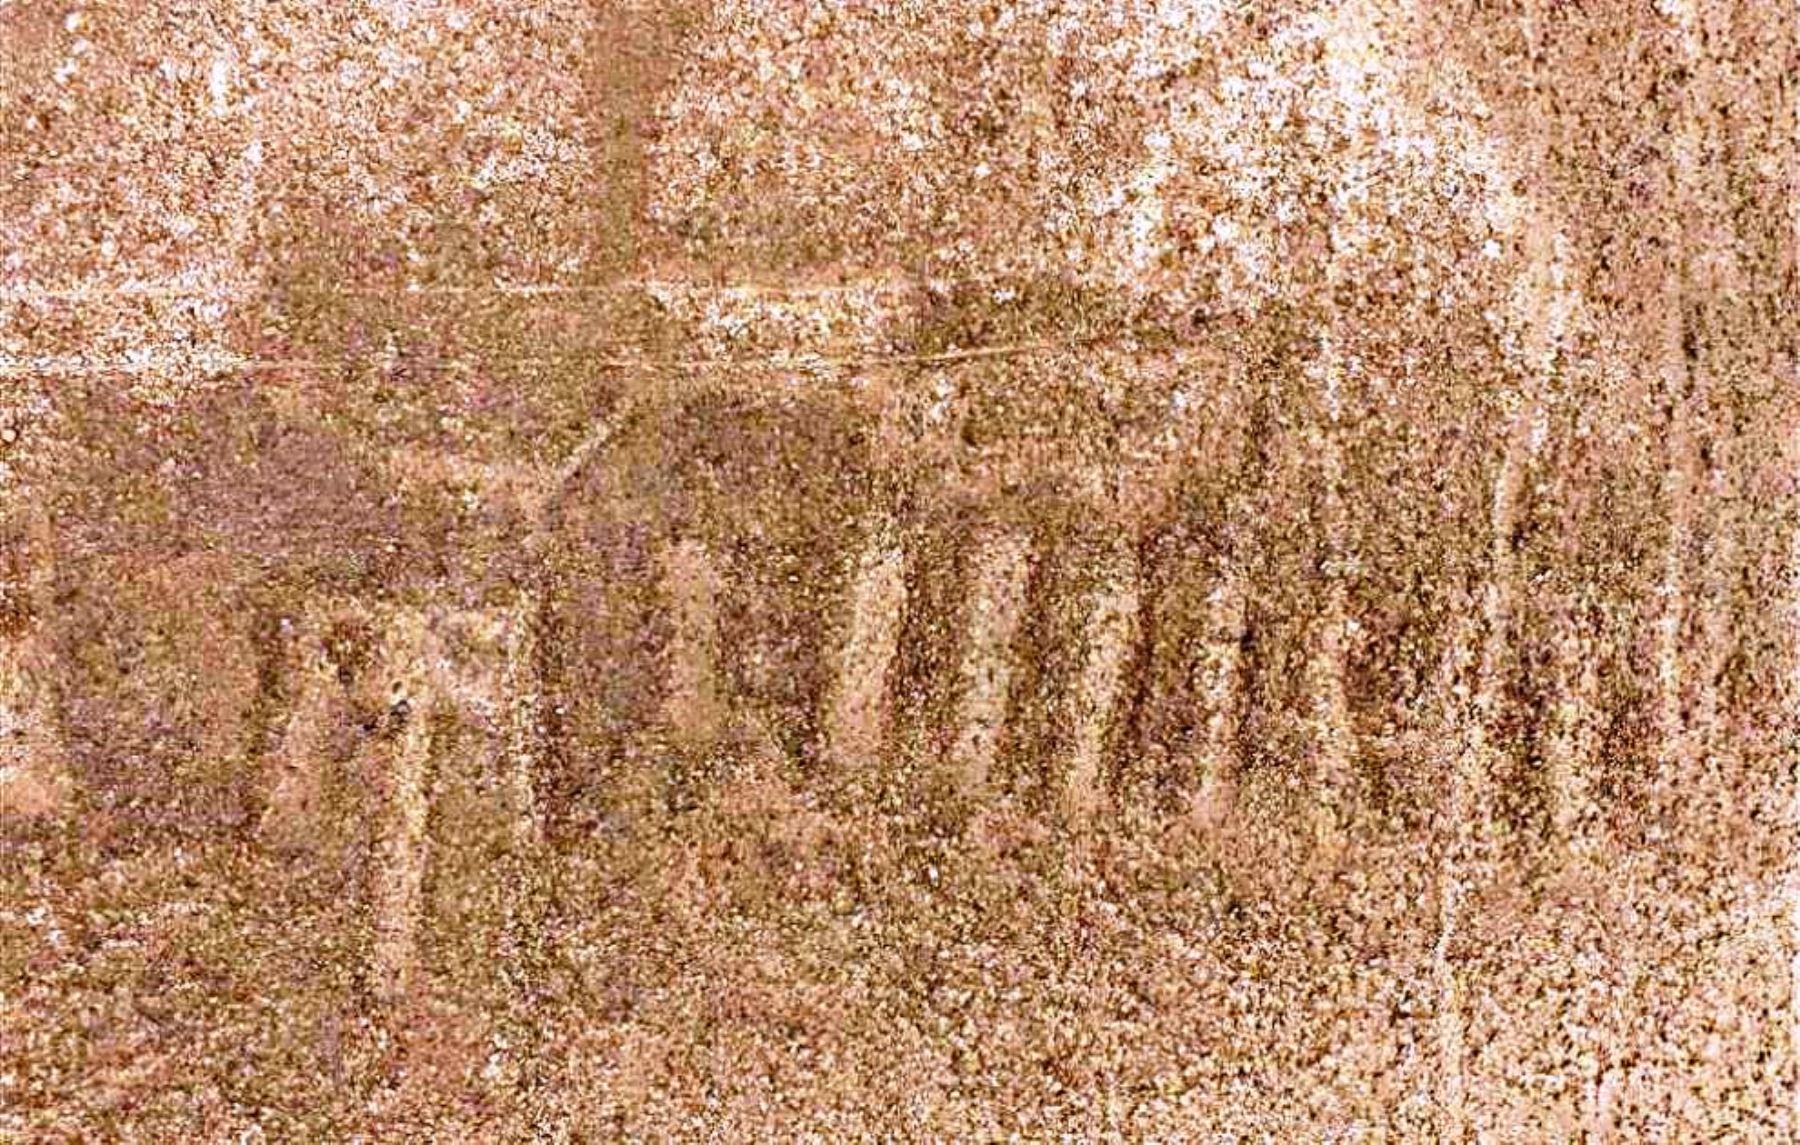 New geoglyph discovered at the Nazca desert